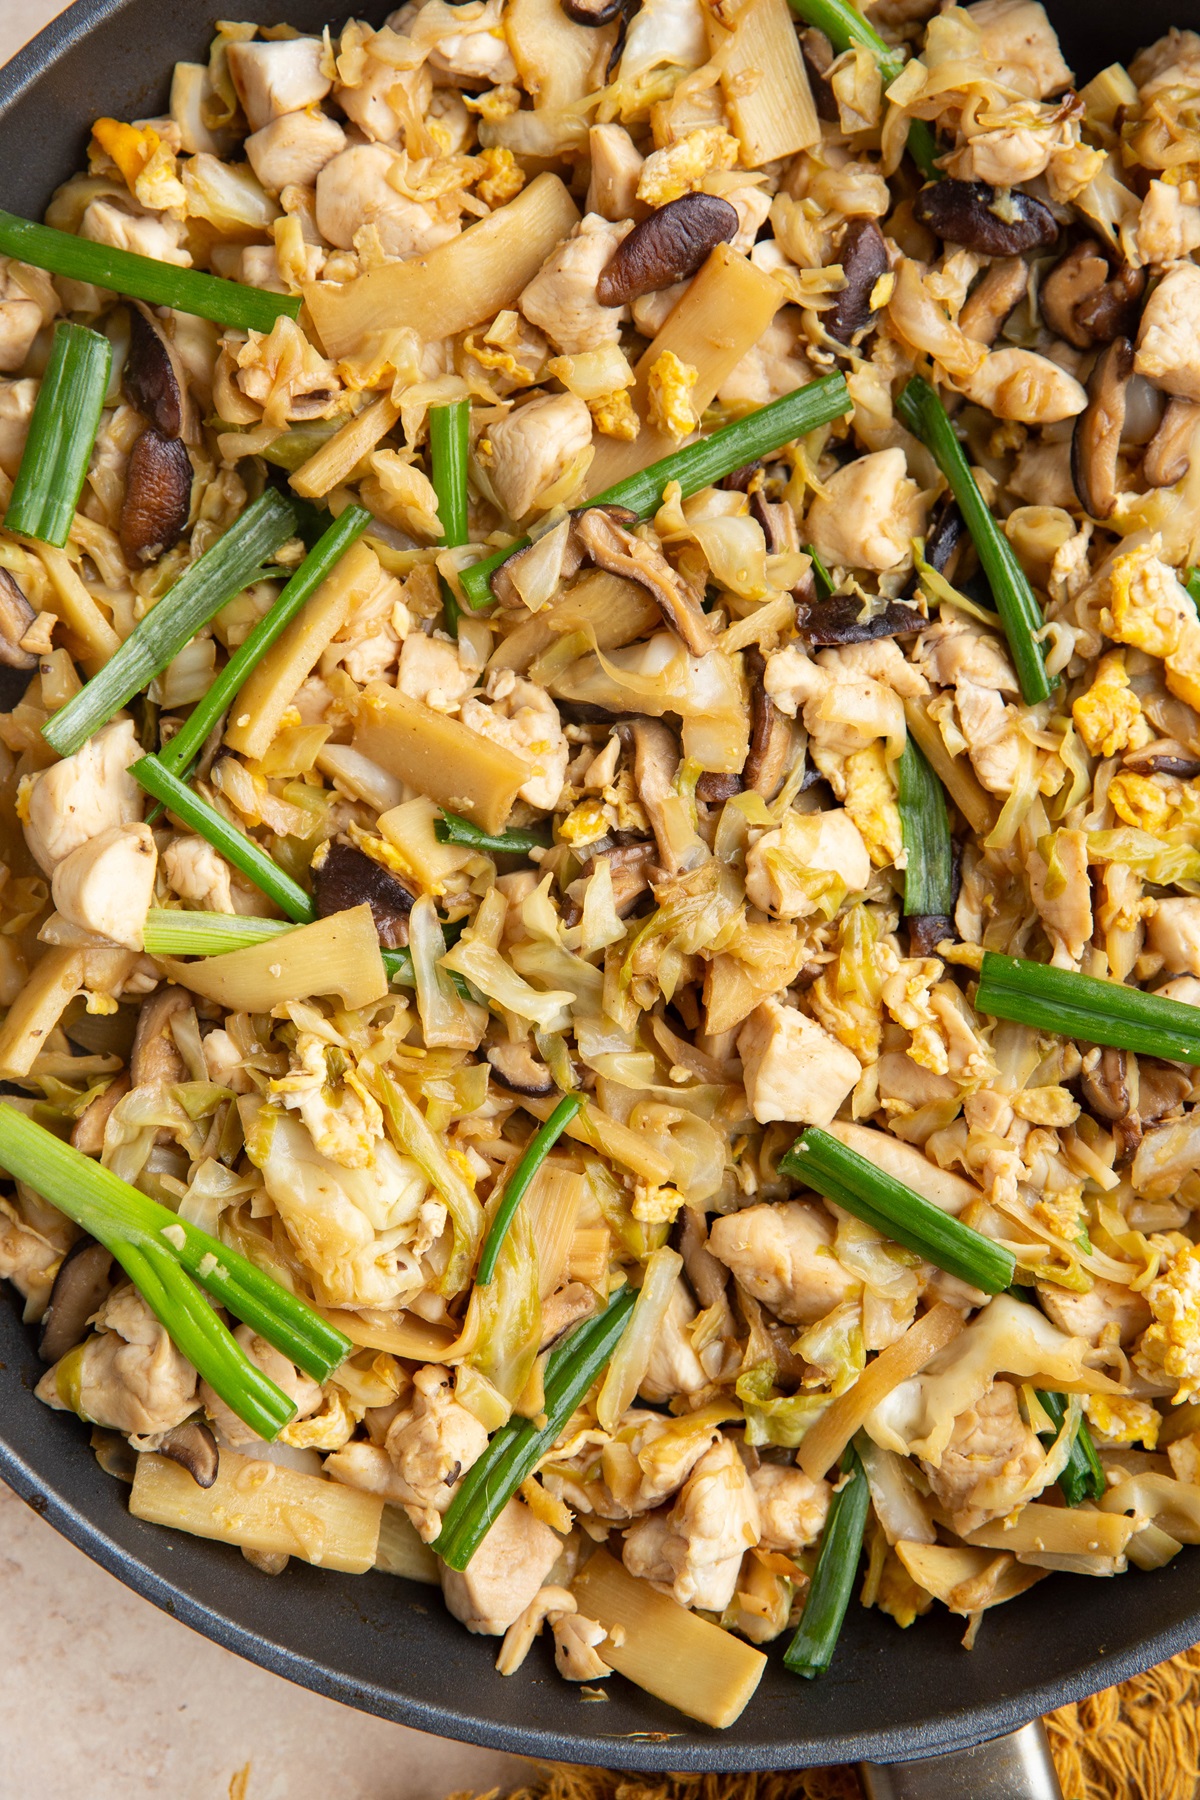 Skillet of Moo Shu Chicken - an authentic Chinese recipe ready in 40 minutes or less.